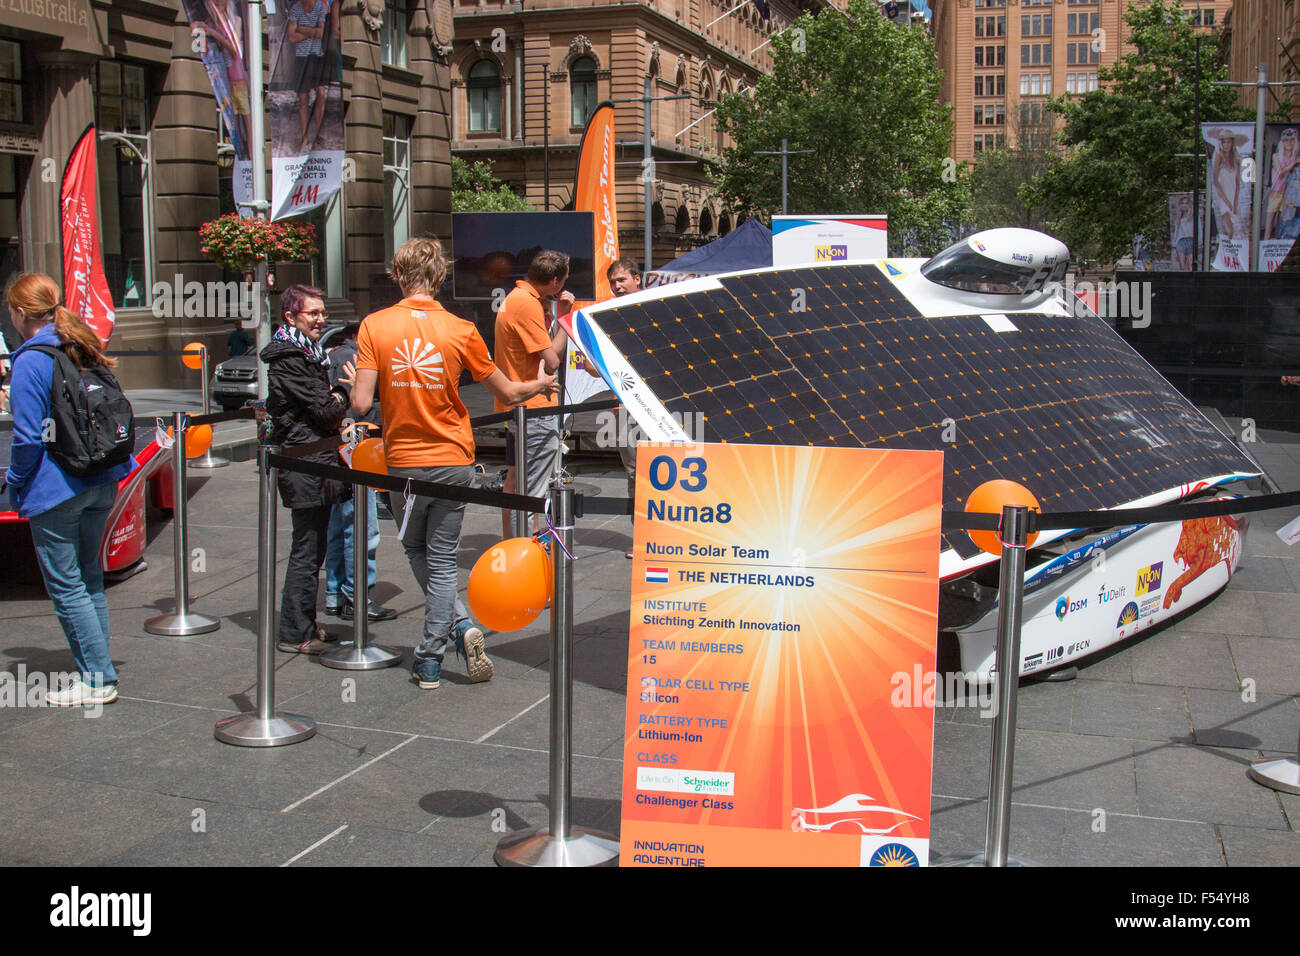 Sydney, Australia. 28th Oct, 2015. Dutch cars Nuon nuna 8  (pictured) and Team Twente  finish 1st and 2nd in the gruelling world solar challenge 3000km race between Darwin and Adelaide, the Netherlands consulate general presents the cars in Sydney Martin Place as an example of Dutch Holland innovation. Stock Photo